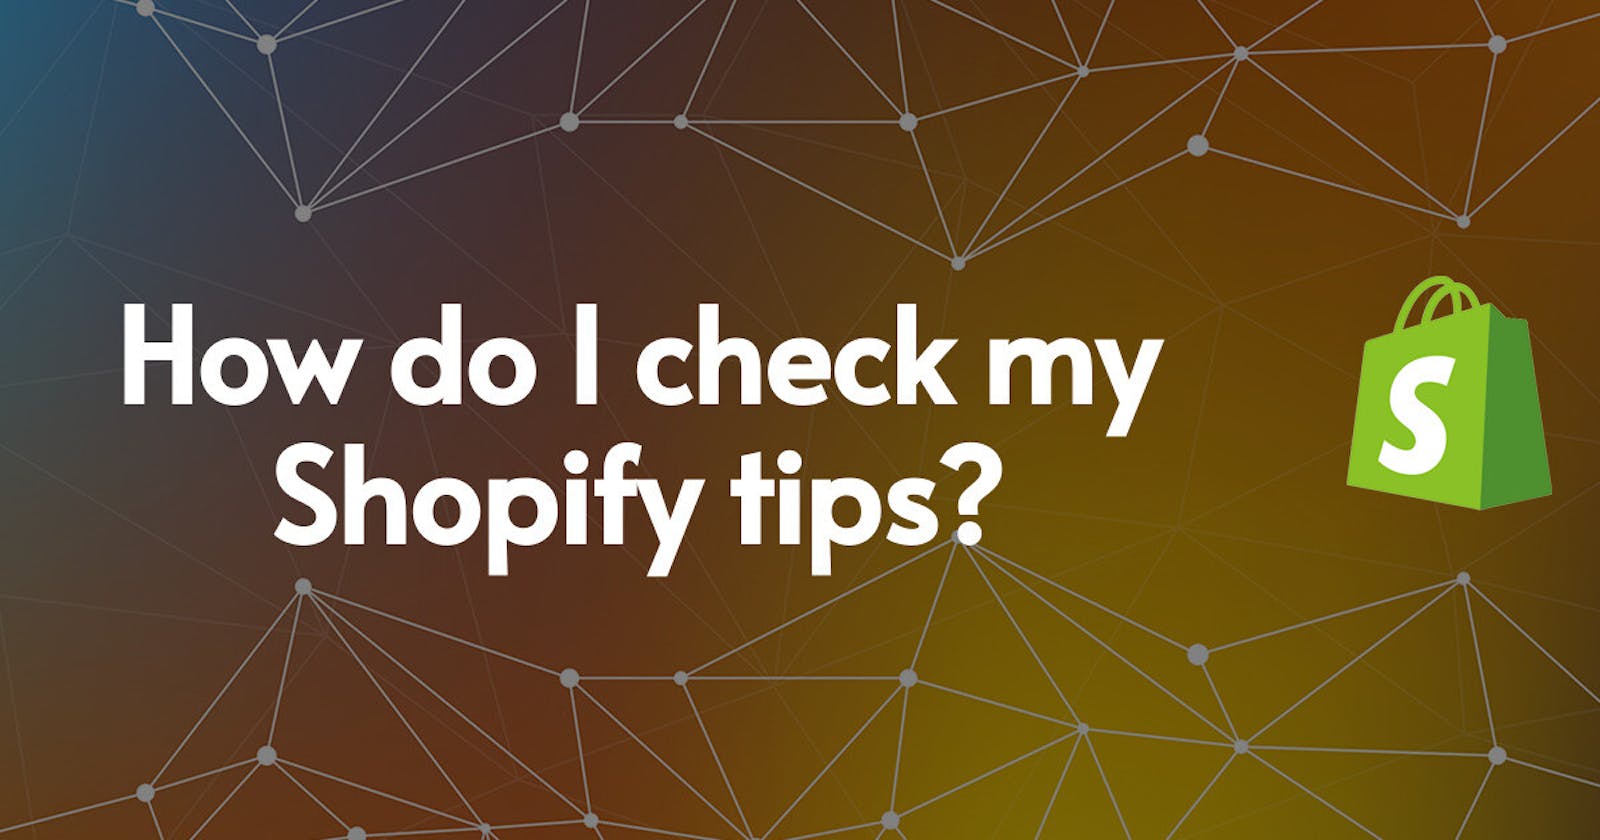 How do I check my Shopify tips?